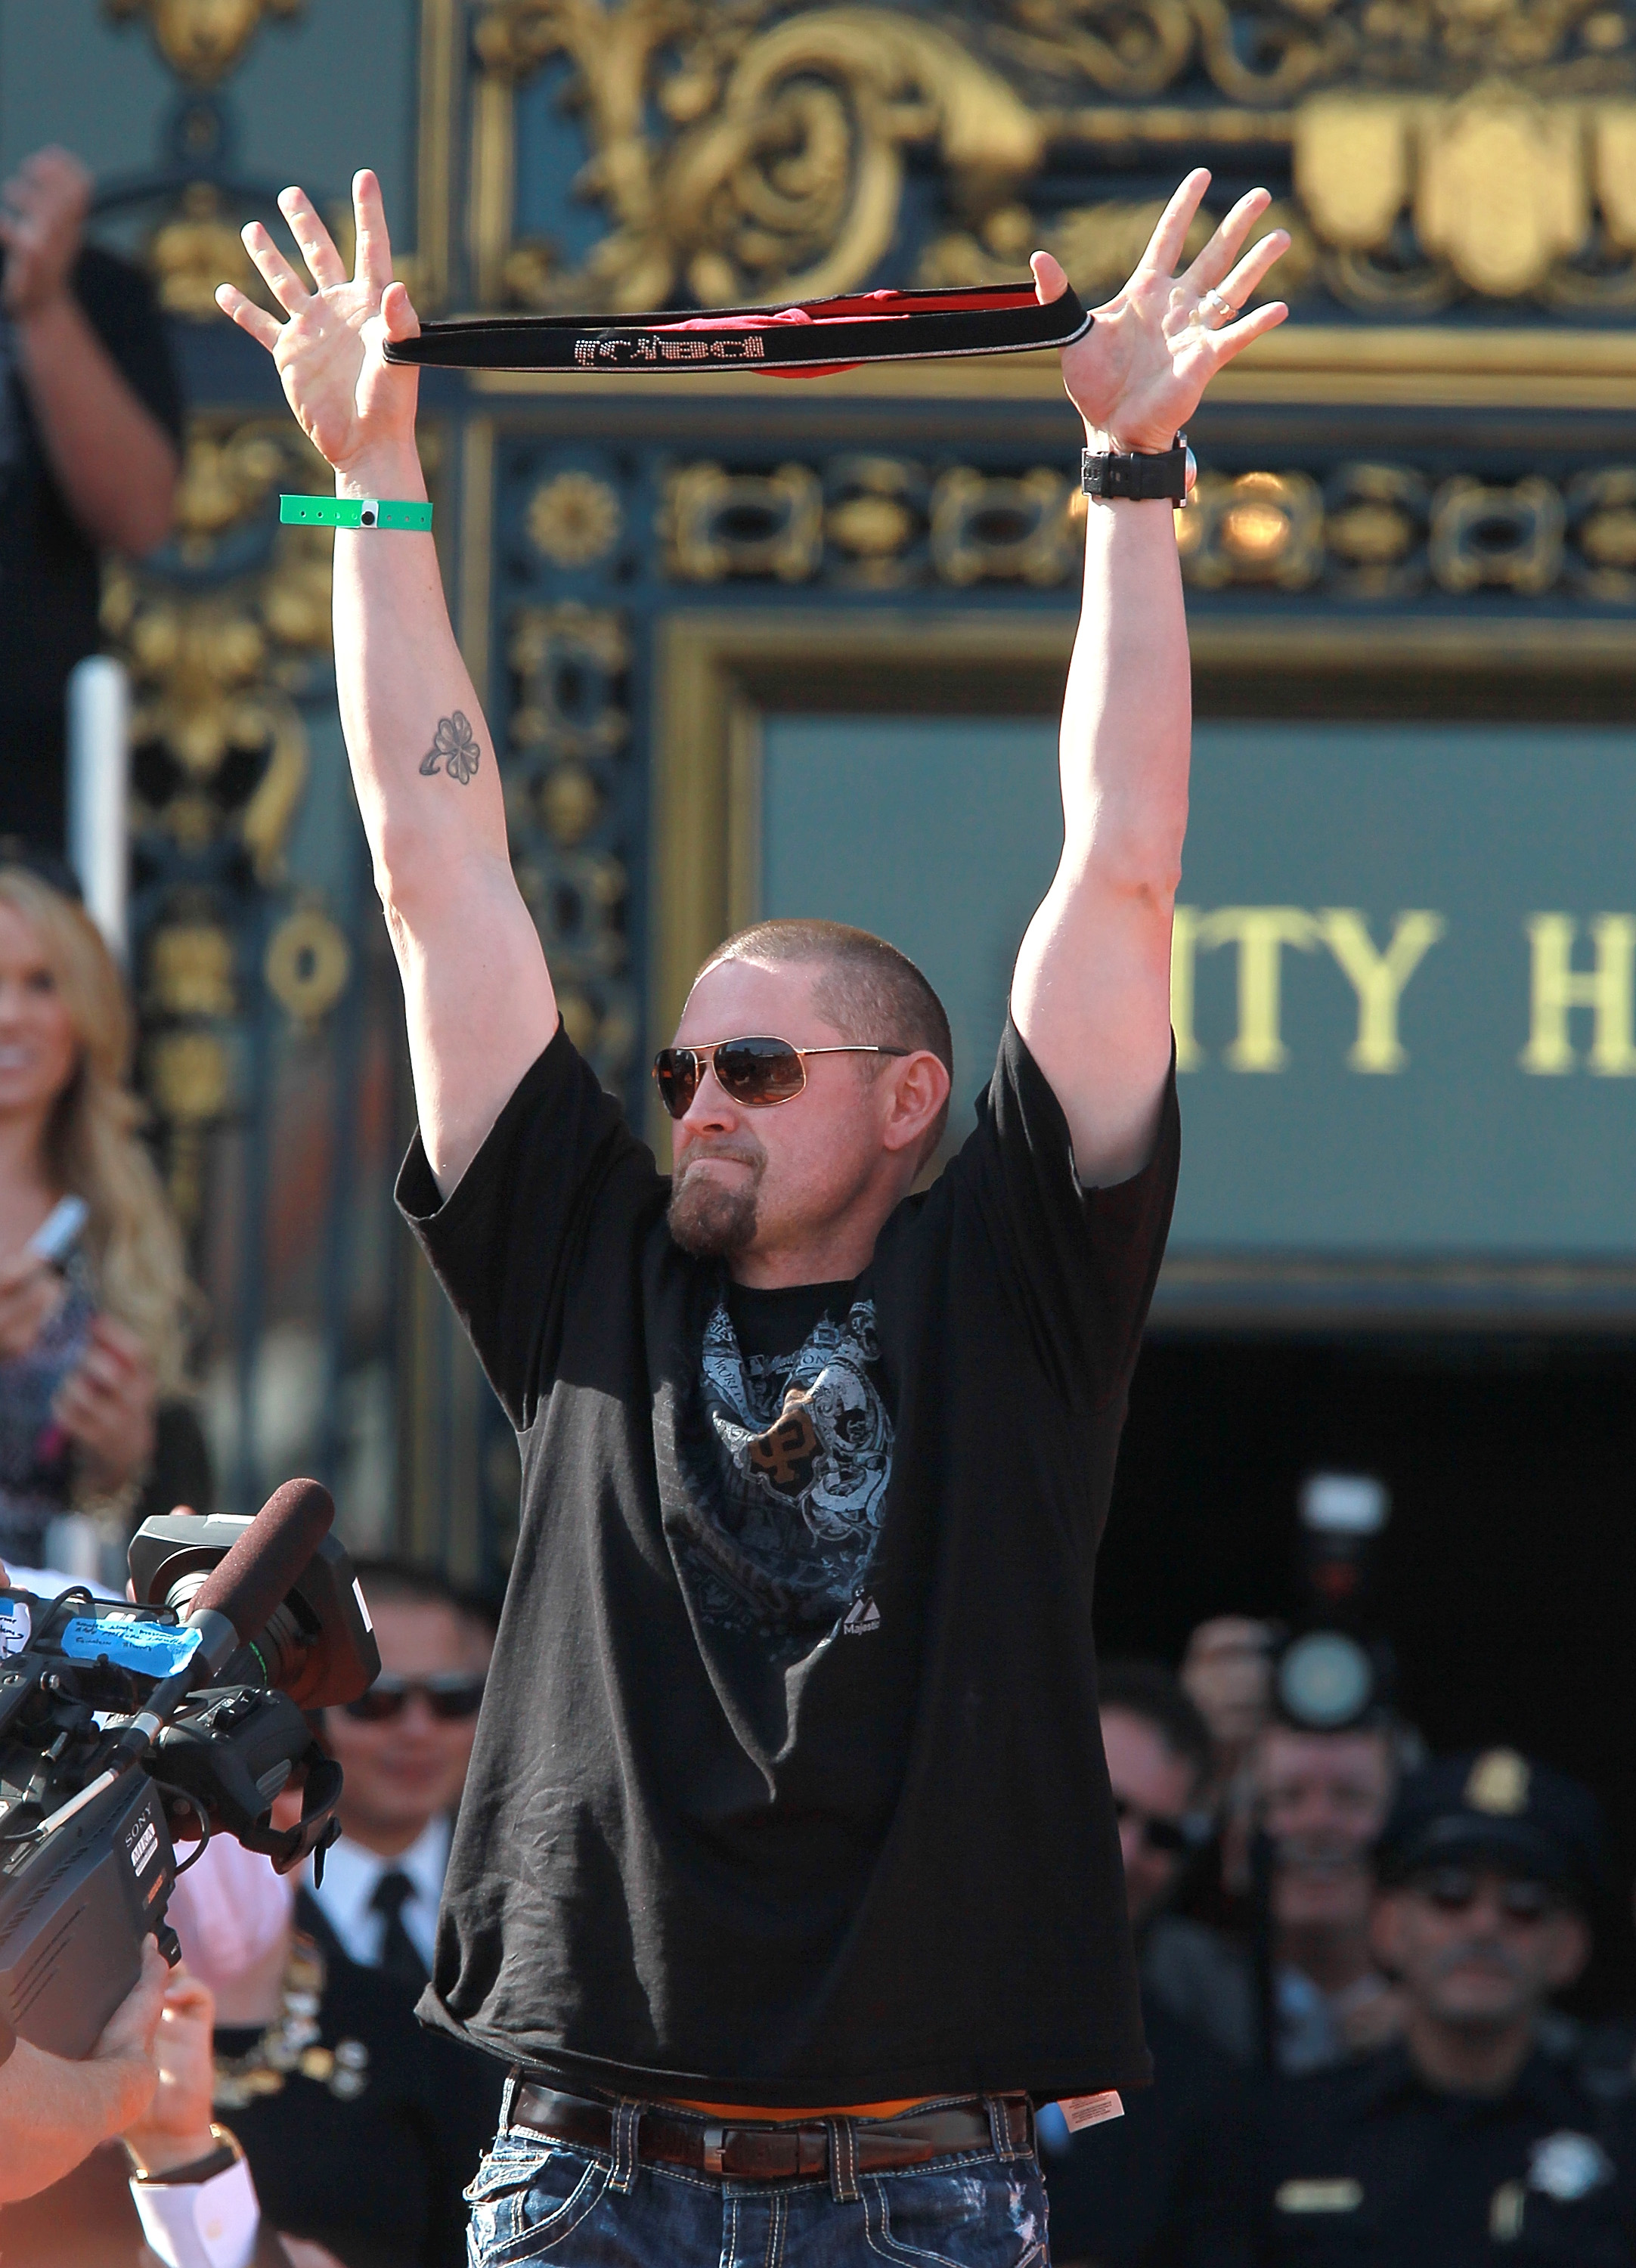 SAN FRANCISCO - NOVEMBER 03:  Aubrey Huff of the San Francisco Giants holds up his red rally thong as he celebrates during the Giants' victory parade and celebration on November 3, 2010 in San Francisco, California. Thousands of Giants fans lined the stre